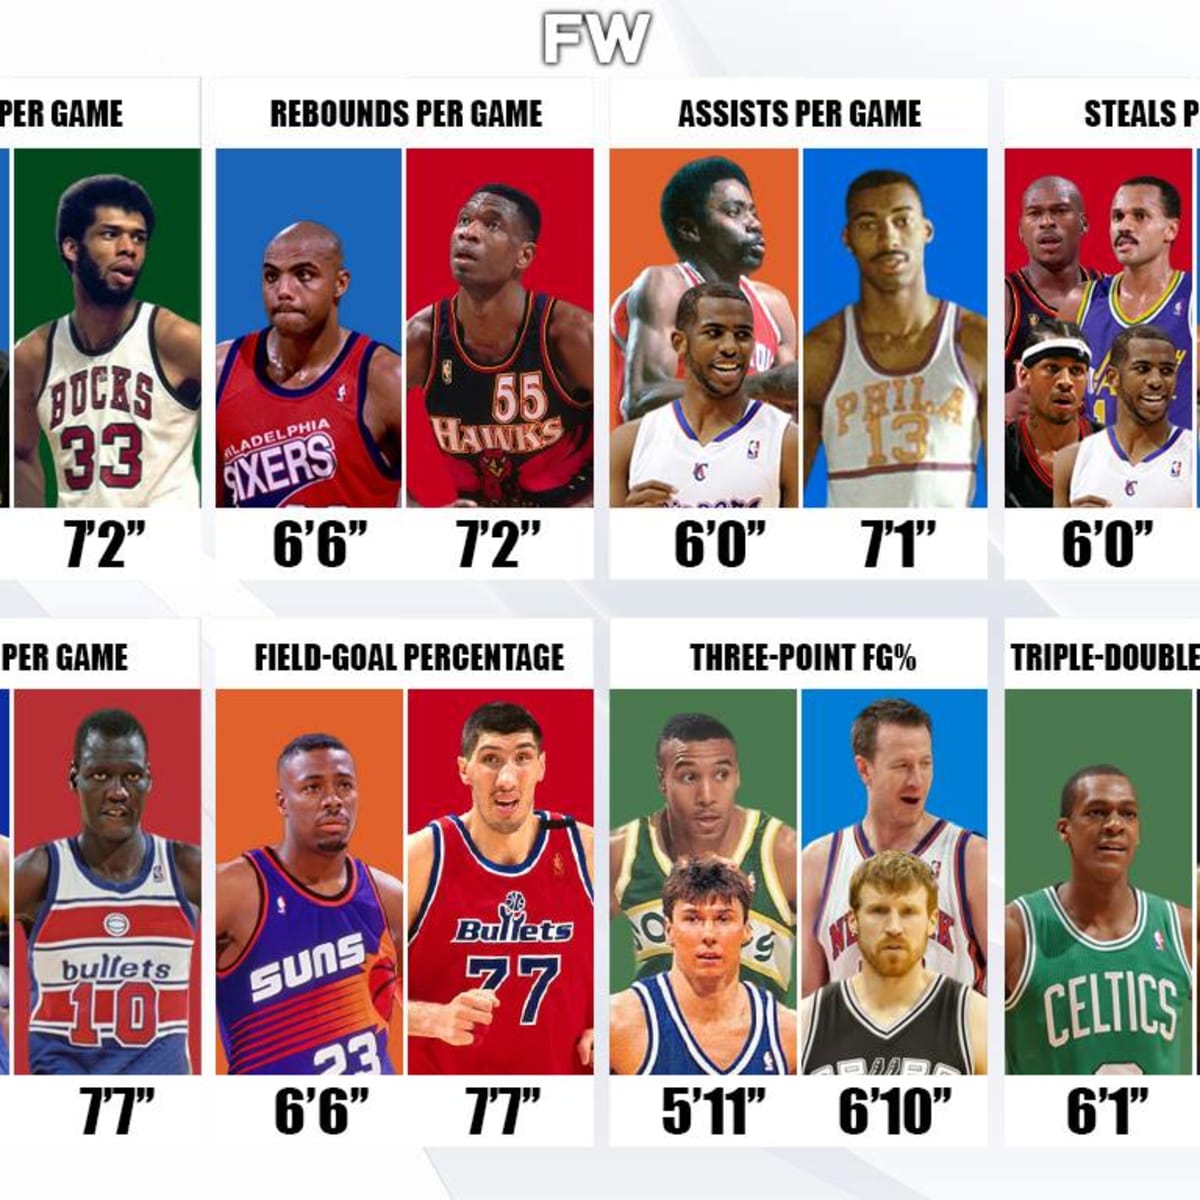 Crazy Stats - Charles Barkley is the shortest player in